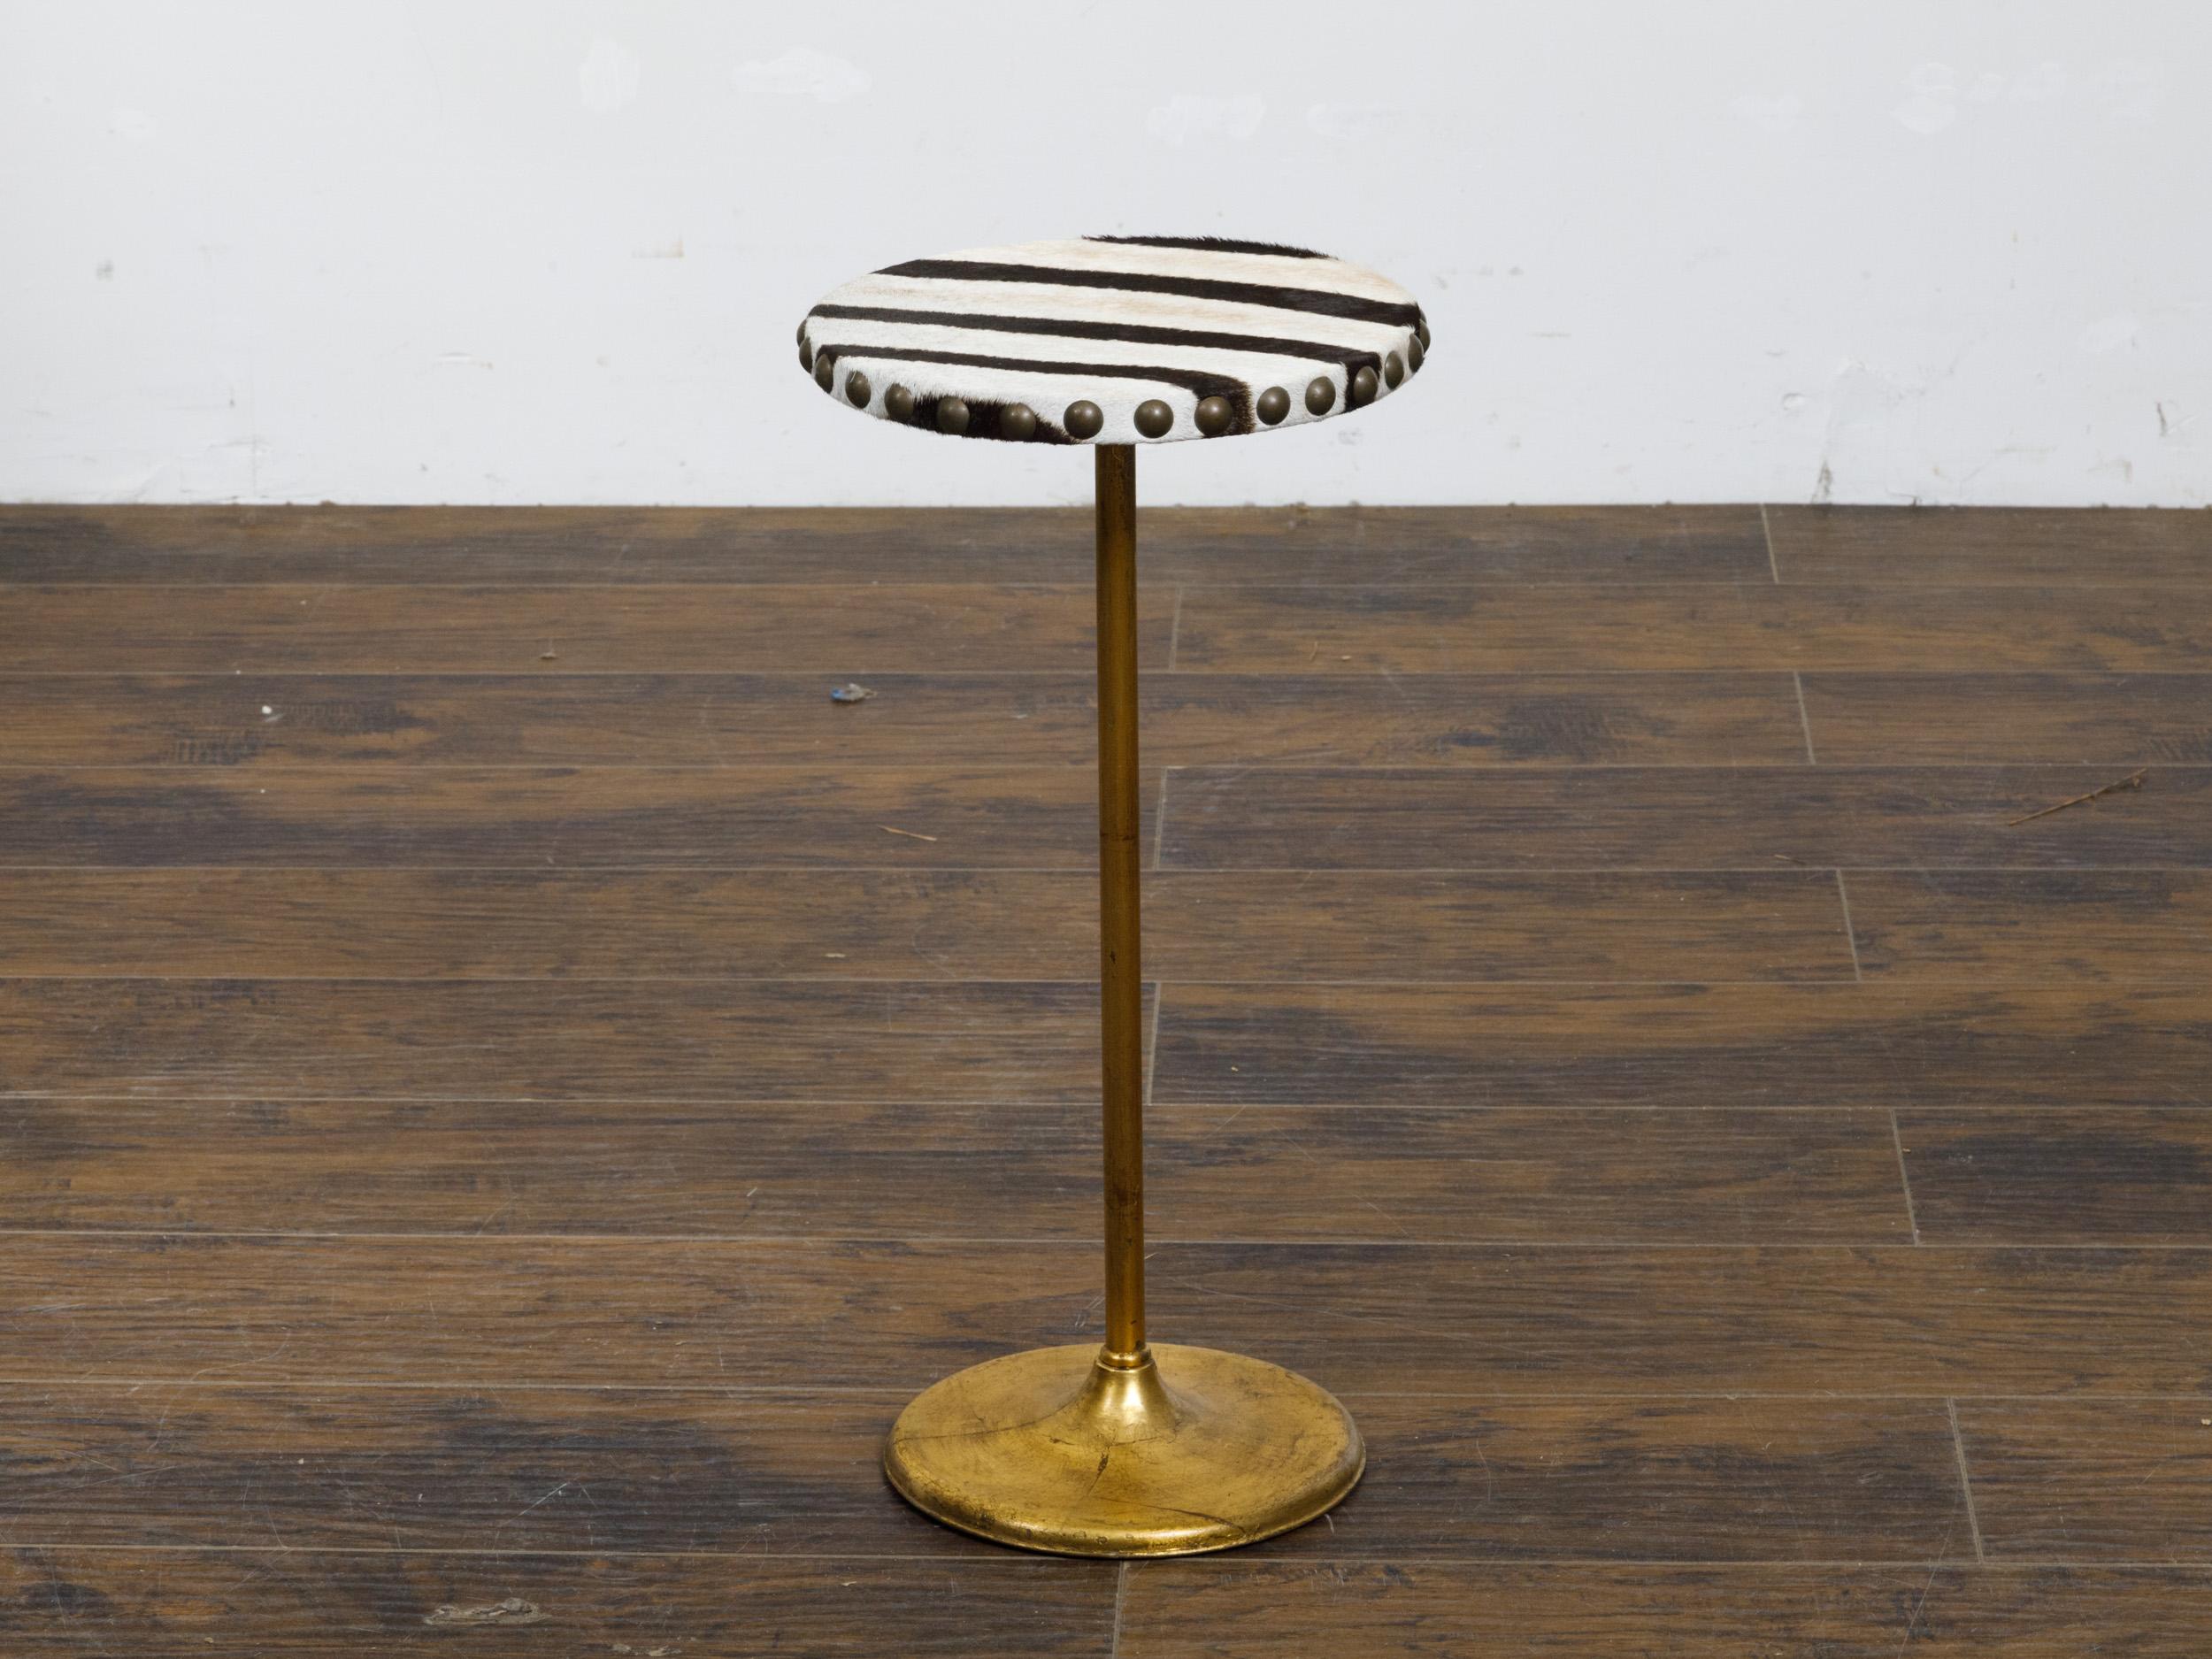 An Italian Midcentury gueridon side table from circa 1950 with circular zebra hide top and gilt brass pedestal base. This Italian Midcentury gueridon side table, circa 1950, is a striking fusion of exotic luxury and golden-era glamour. The circular